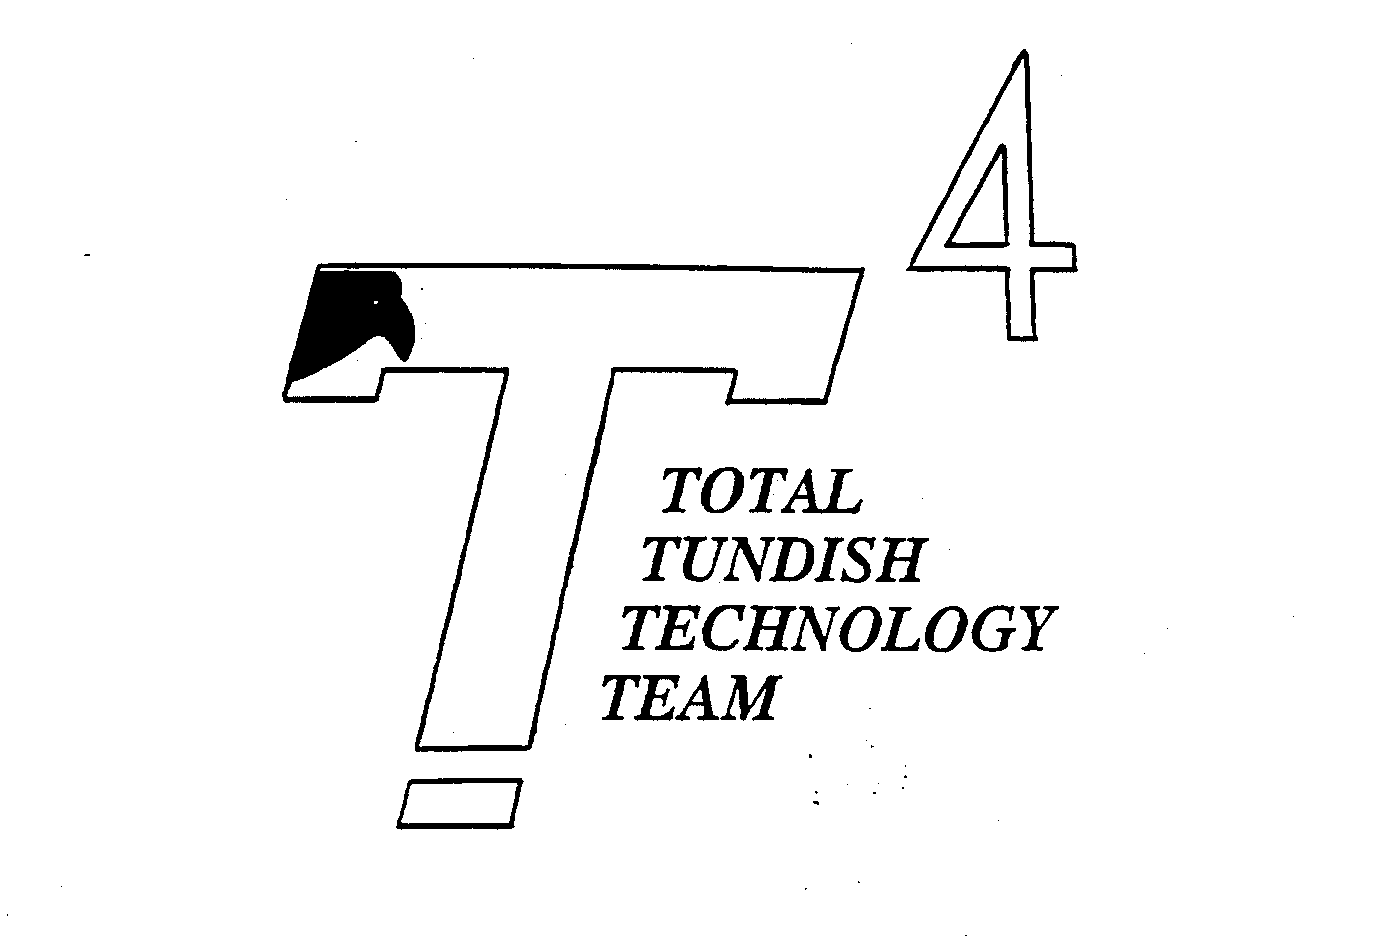  T4 TOTAL TUNDISH TECHNOLOGY TEAM